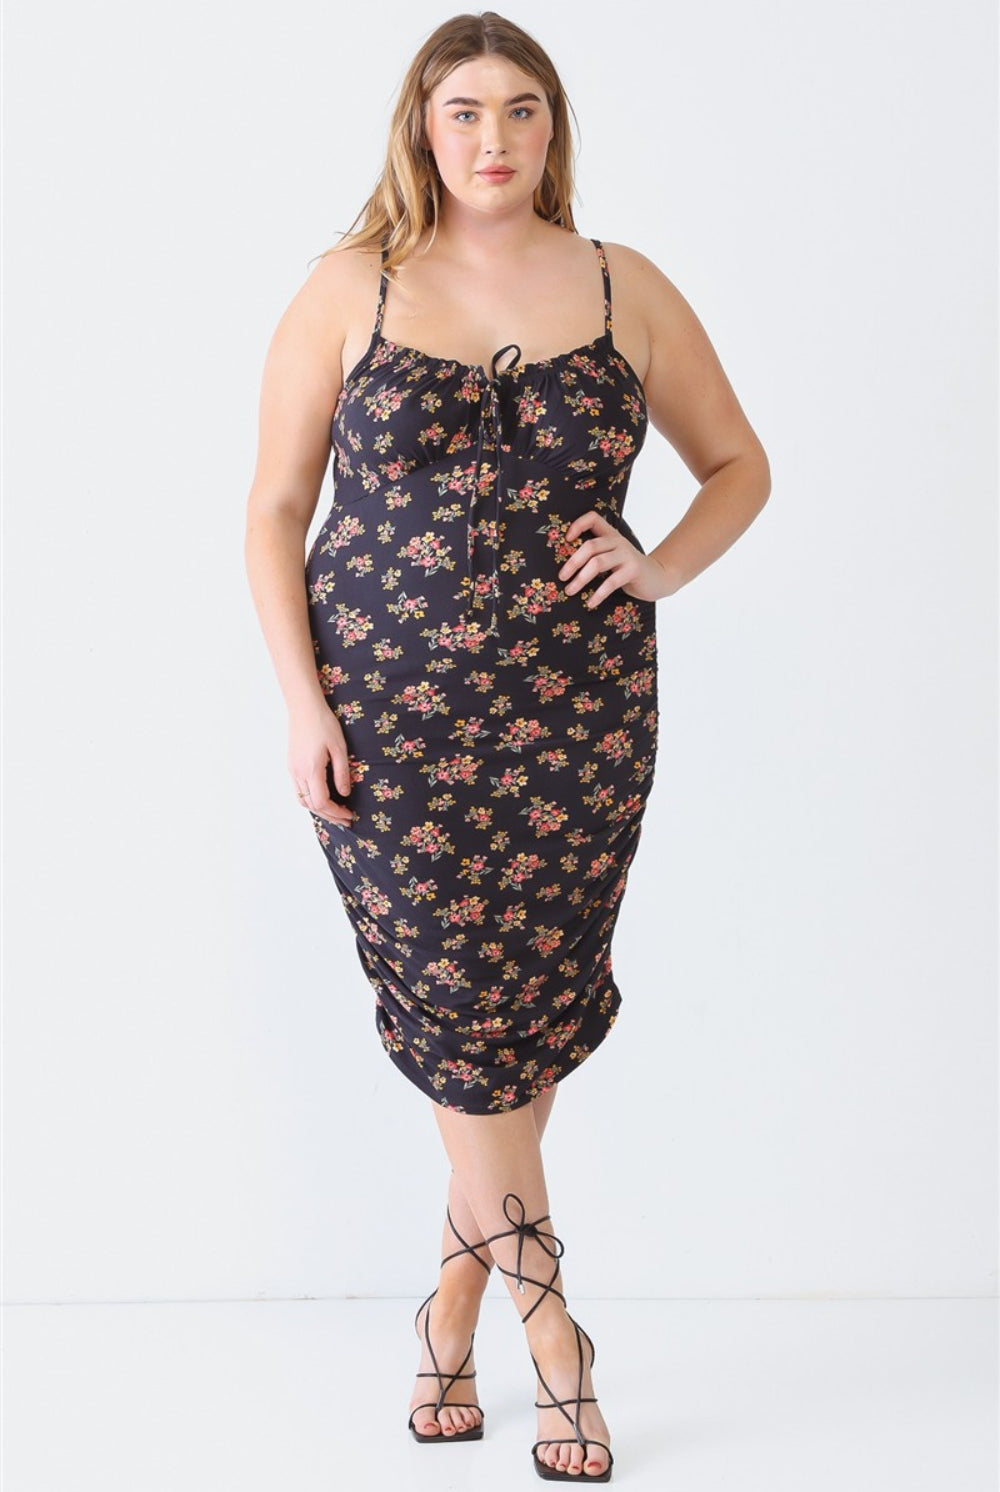 Chic plus size cami dress with a delicate floral pattern, perfect for any occasion.